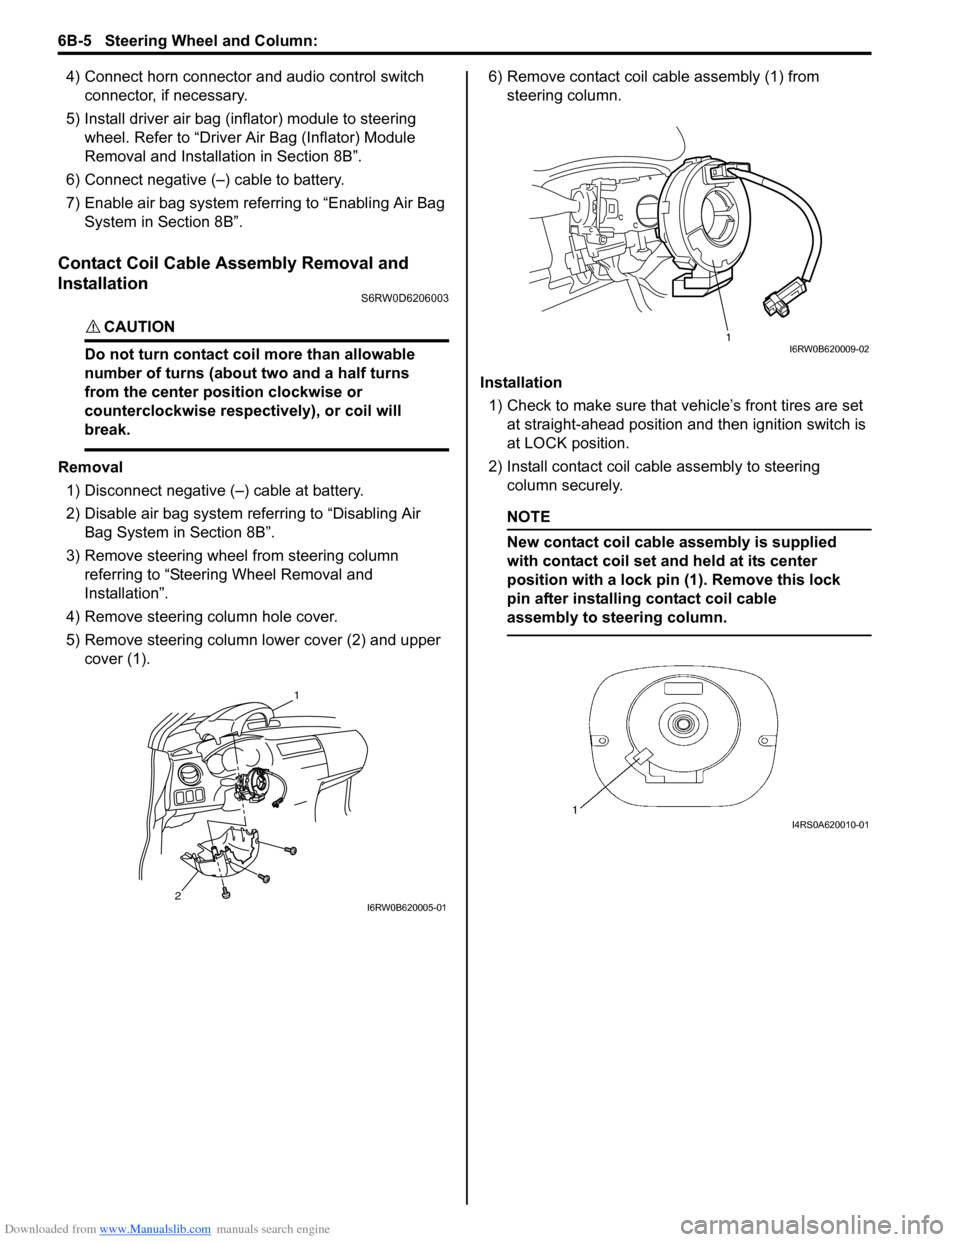 SUZUKI SX4 2006 1.G Service Workshop Manual Downloaded from www.Manualslib.com manuals search engine 6B-5 Steering Wheel and Column: 
4) Connect horn connector and audio control switch 
connector, if necessary.
5) Install driver air bag (inflat